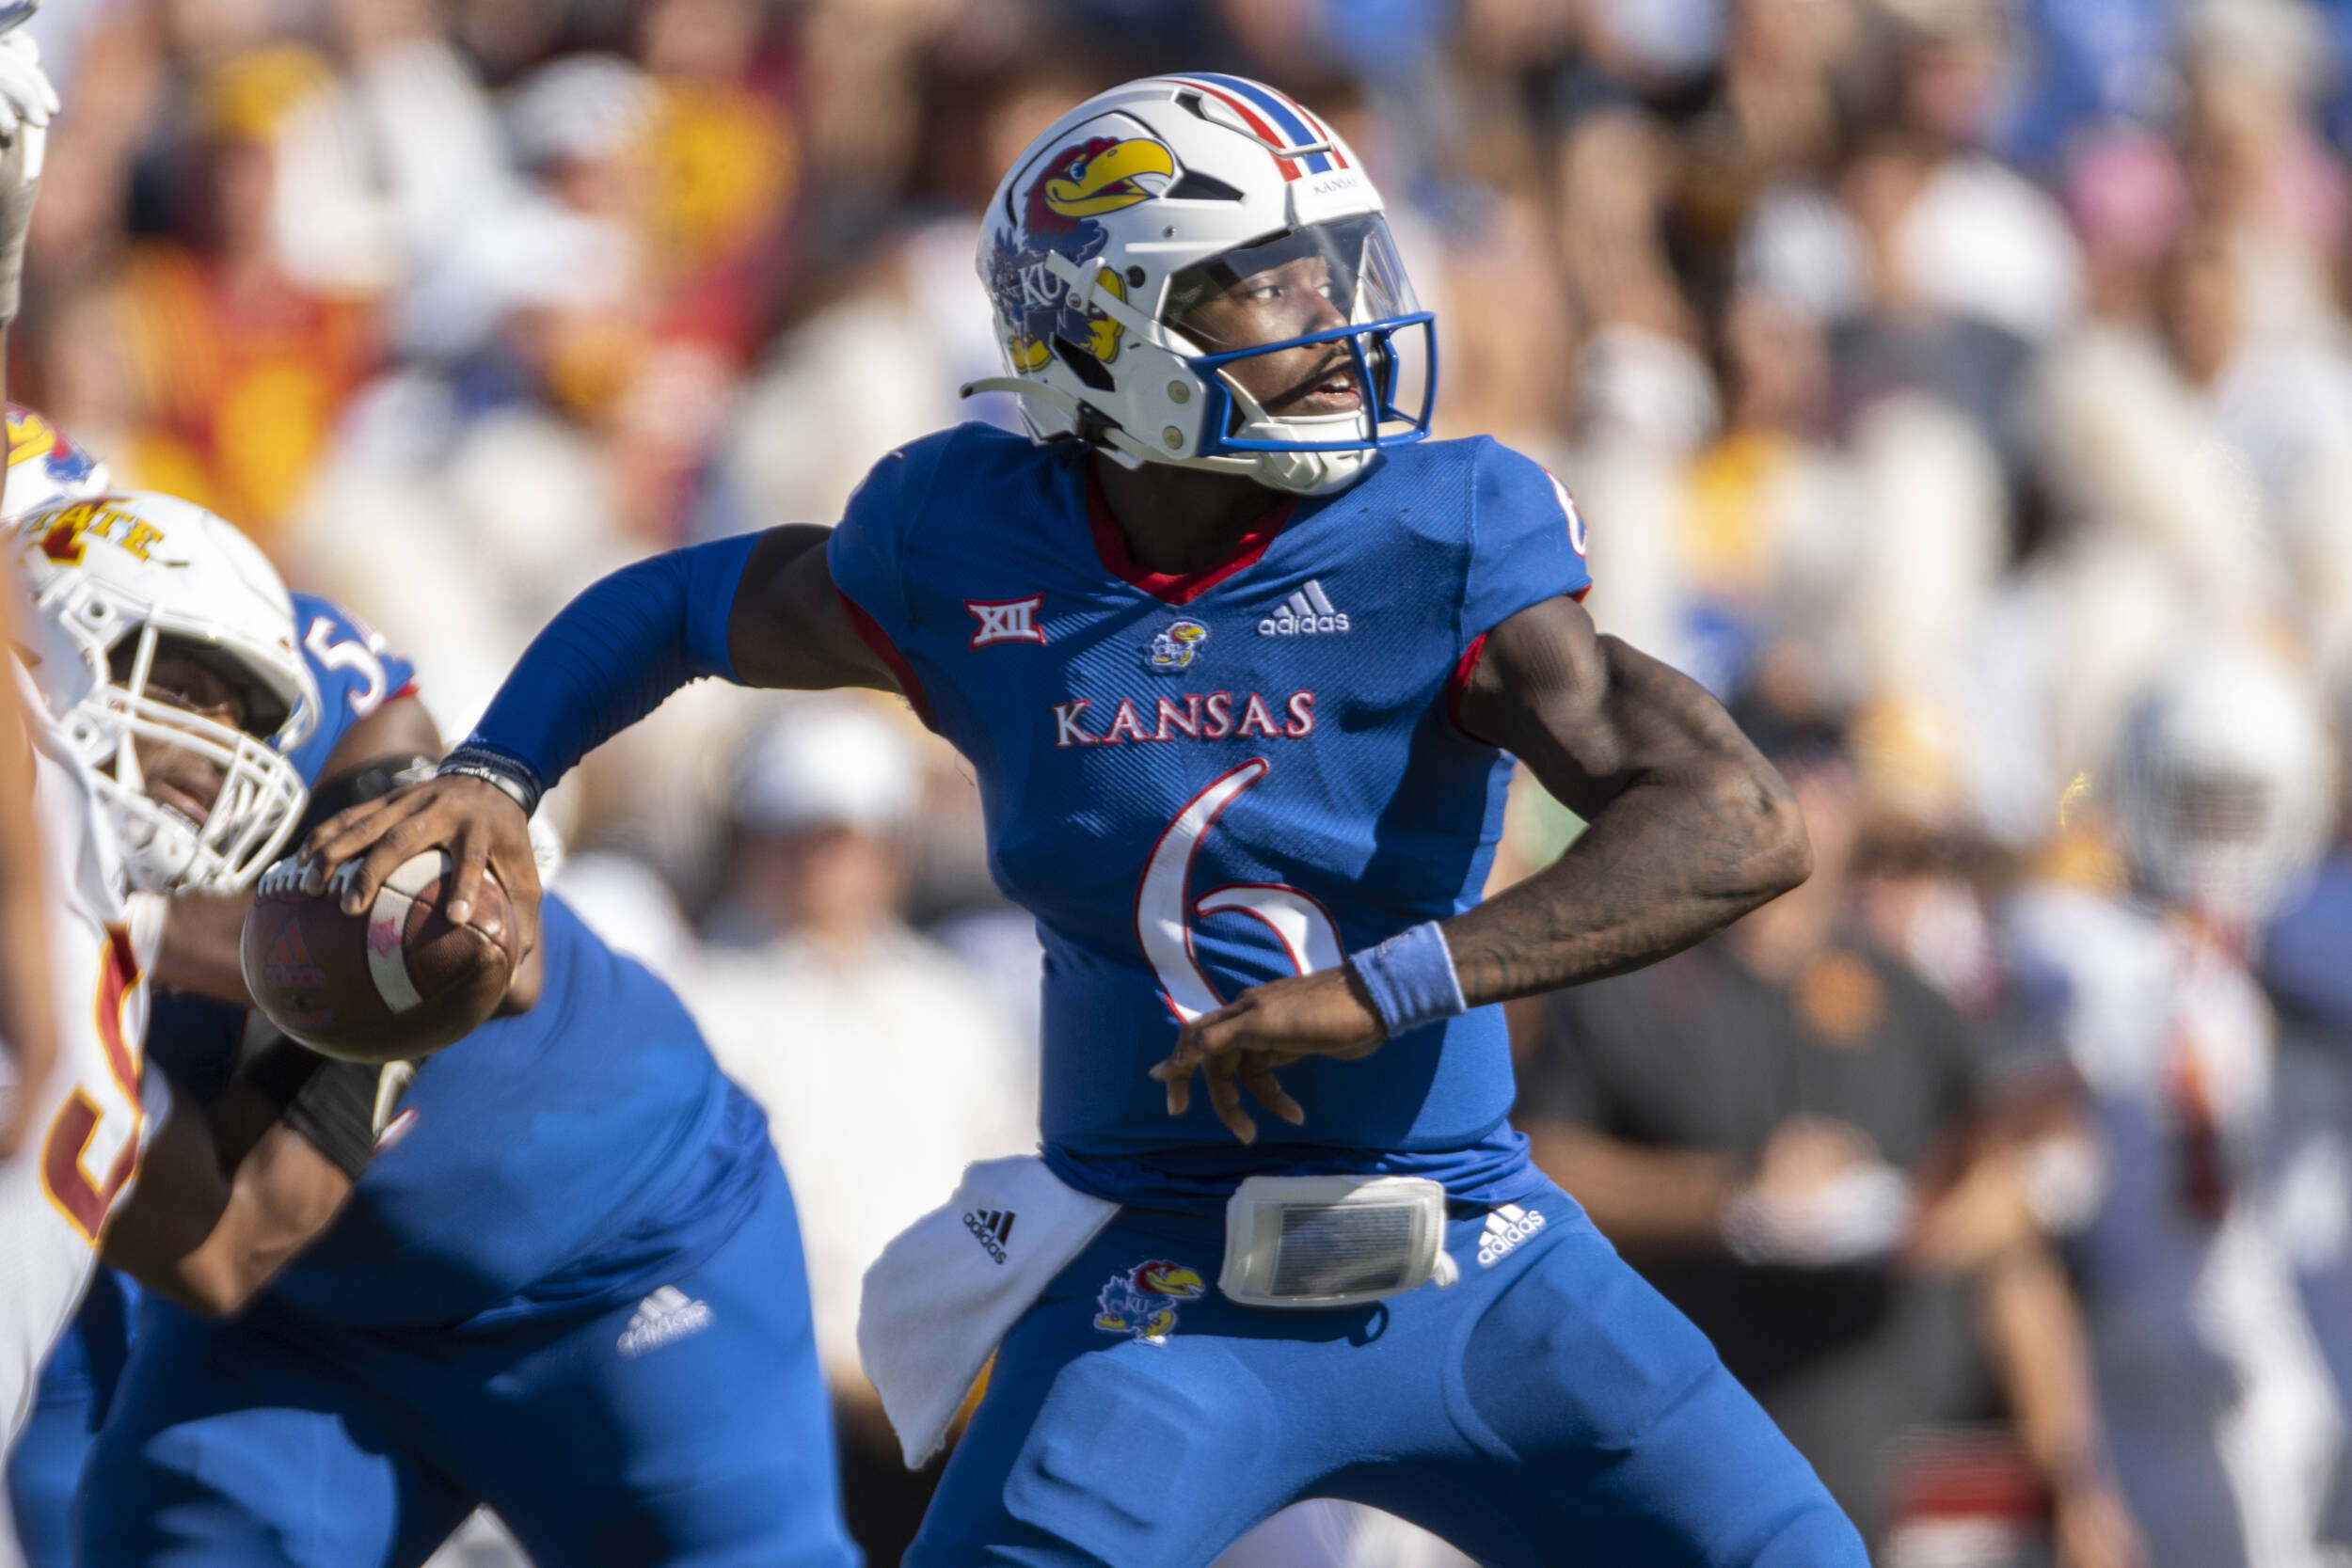 KU football uniforms to pay homage to Civil War regiment with complicated  legacy  News, Sports, Jobs - Lawrence Journal-World: news, information,  headlines and events in Lawrence, Kansas